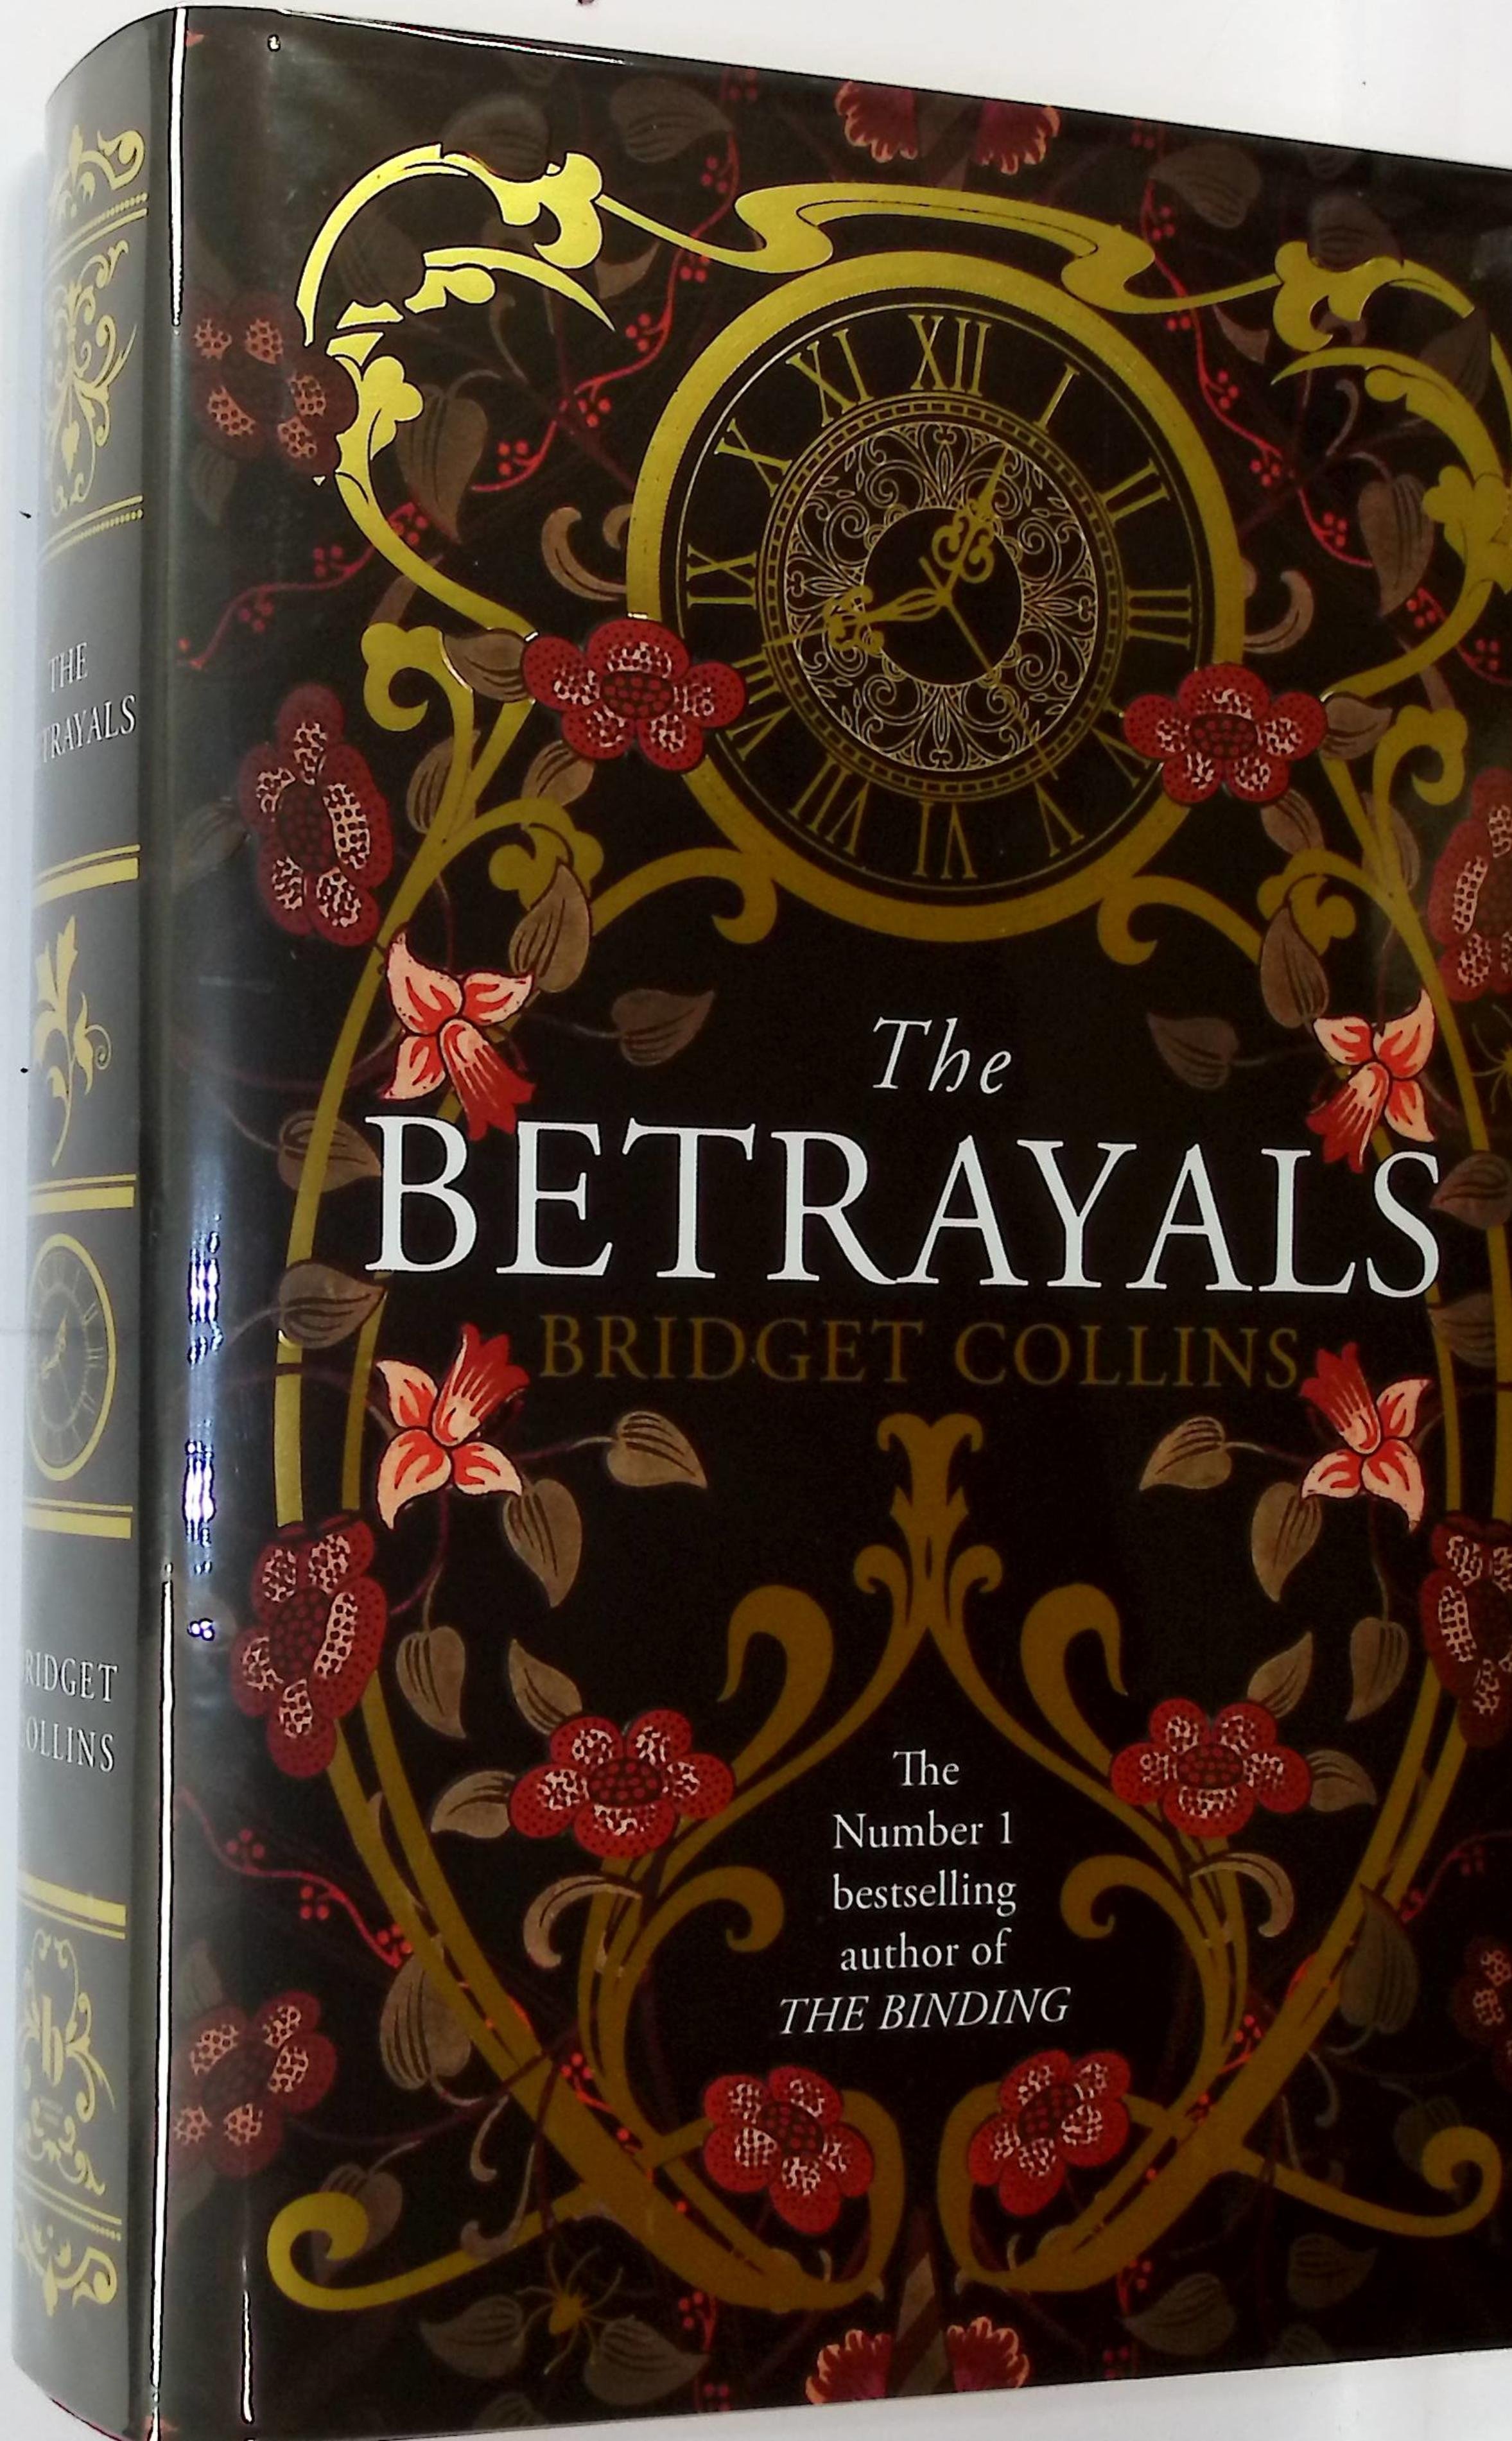 The Betrayals. Signed limited edition copy.